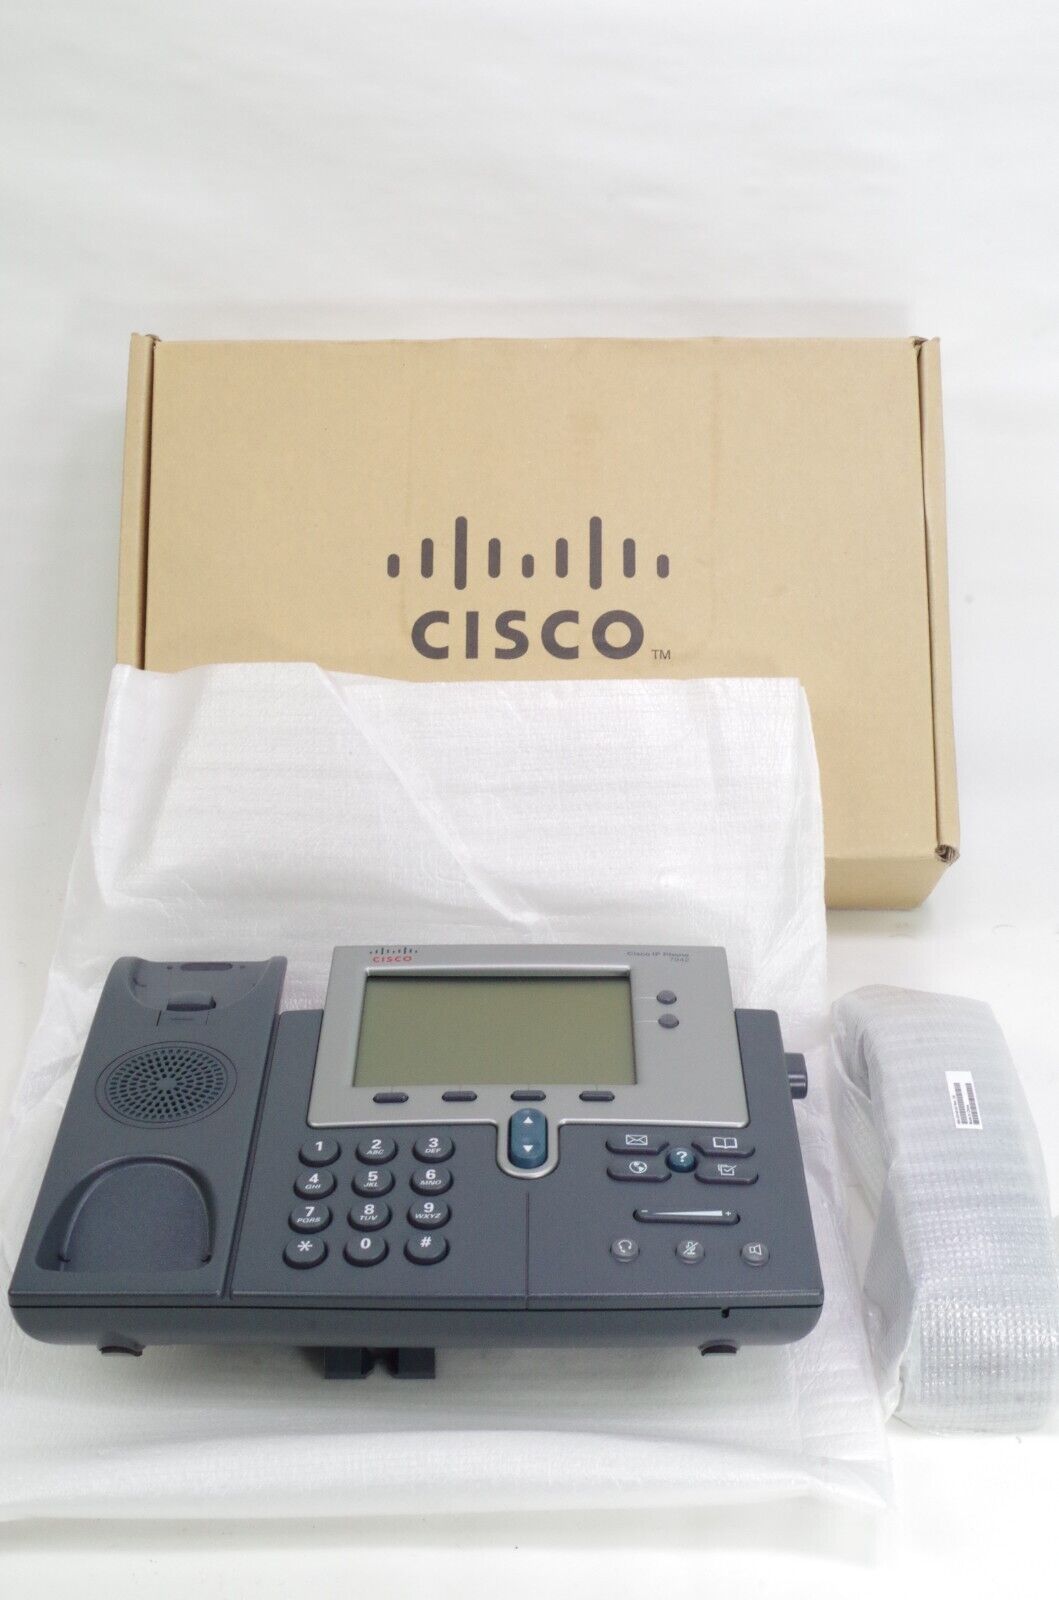 New Cisco CP-7942G 7942G Unified IP VoIP Business Office Phone w/Base & Handset